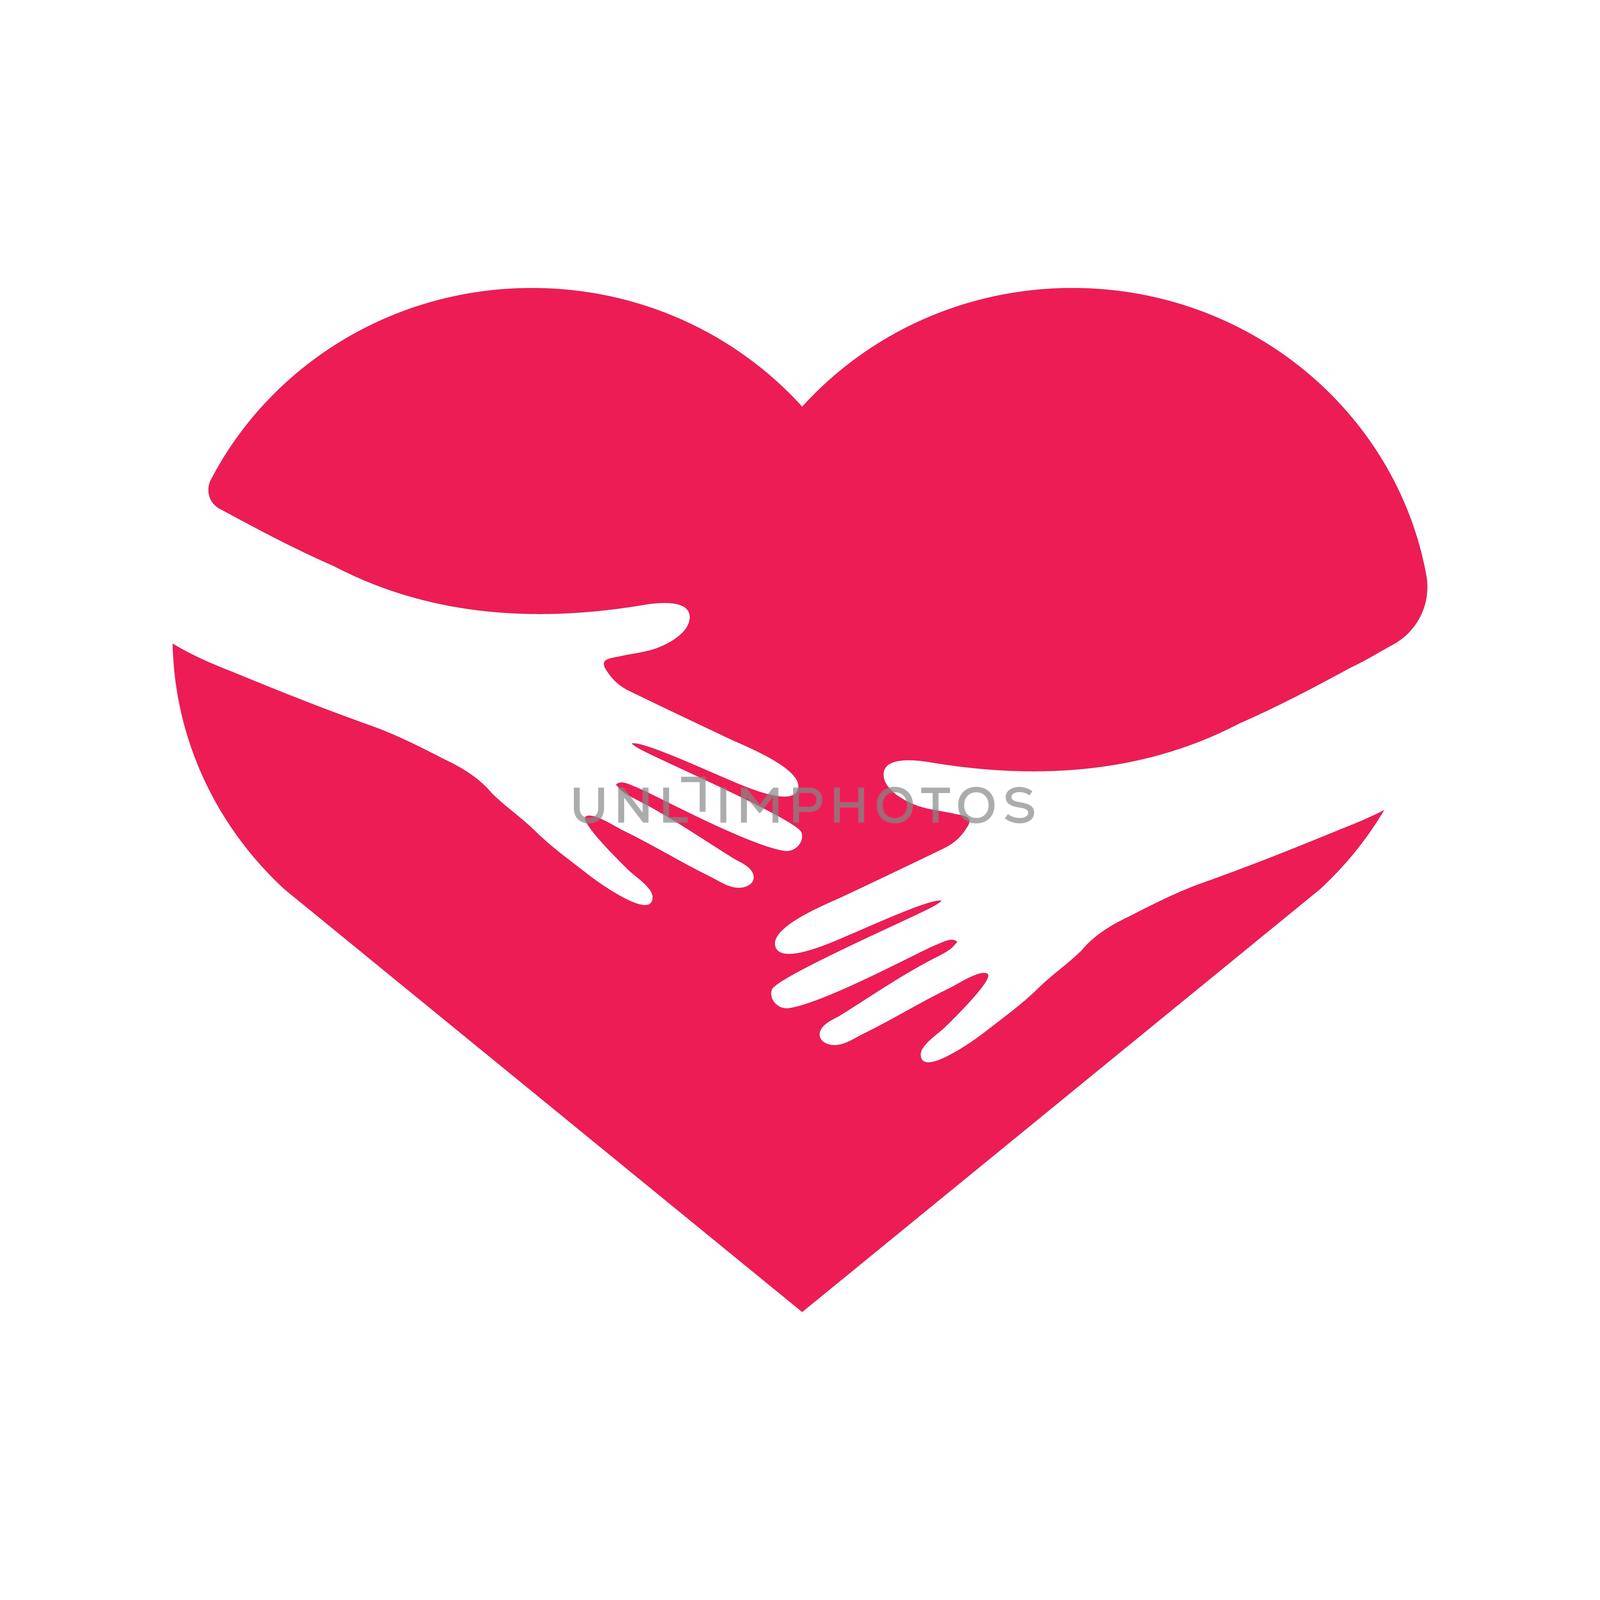 Hand embracing heart. Love yourself concept. Volunteer support flat sign. Vector illustration. by Elena_Garder